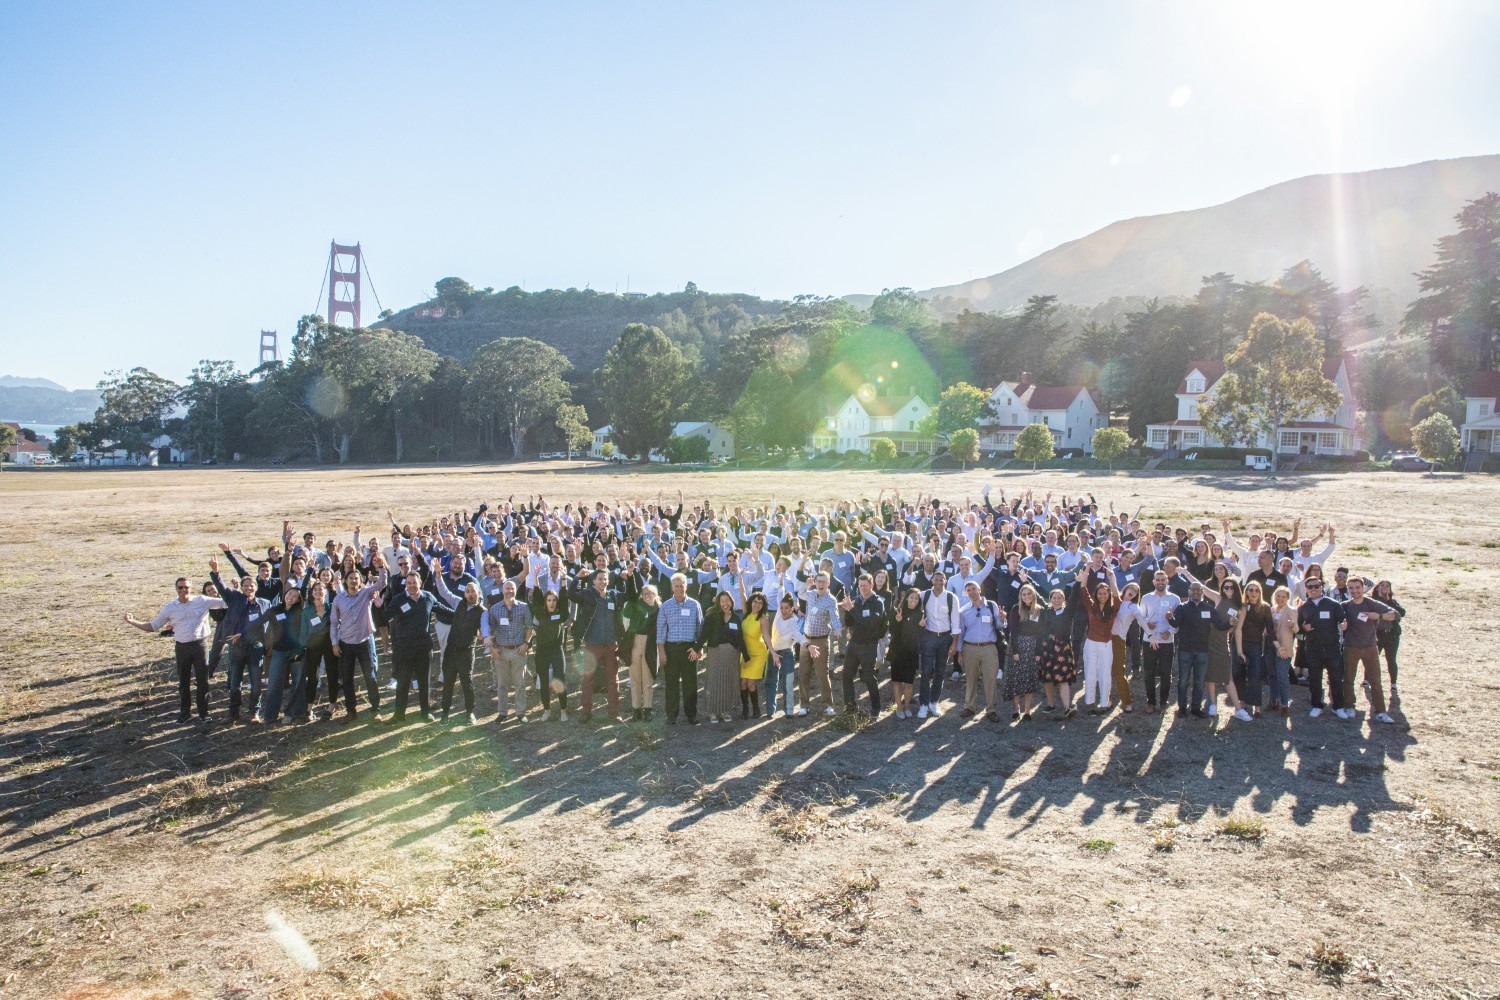 A group photo of the Alpine team and community at our annual Growth Summit event in 2022.